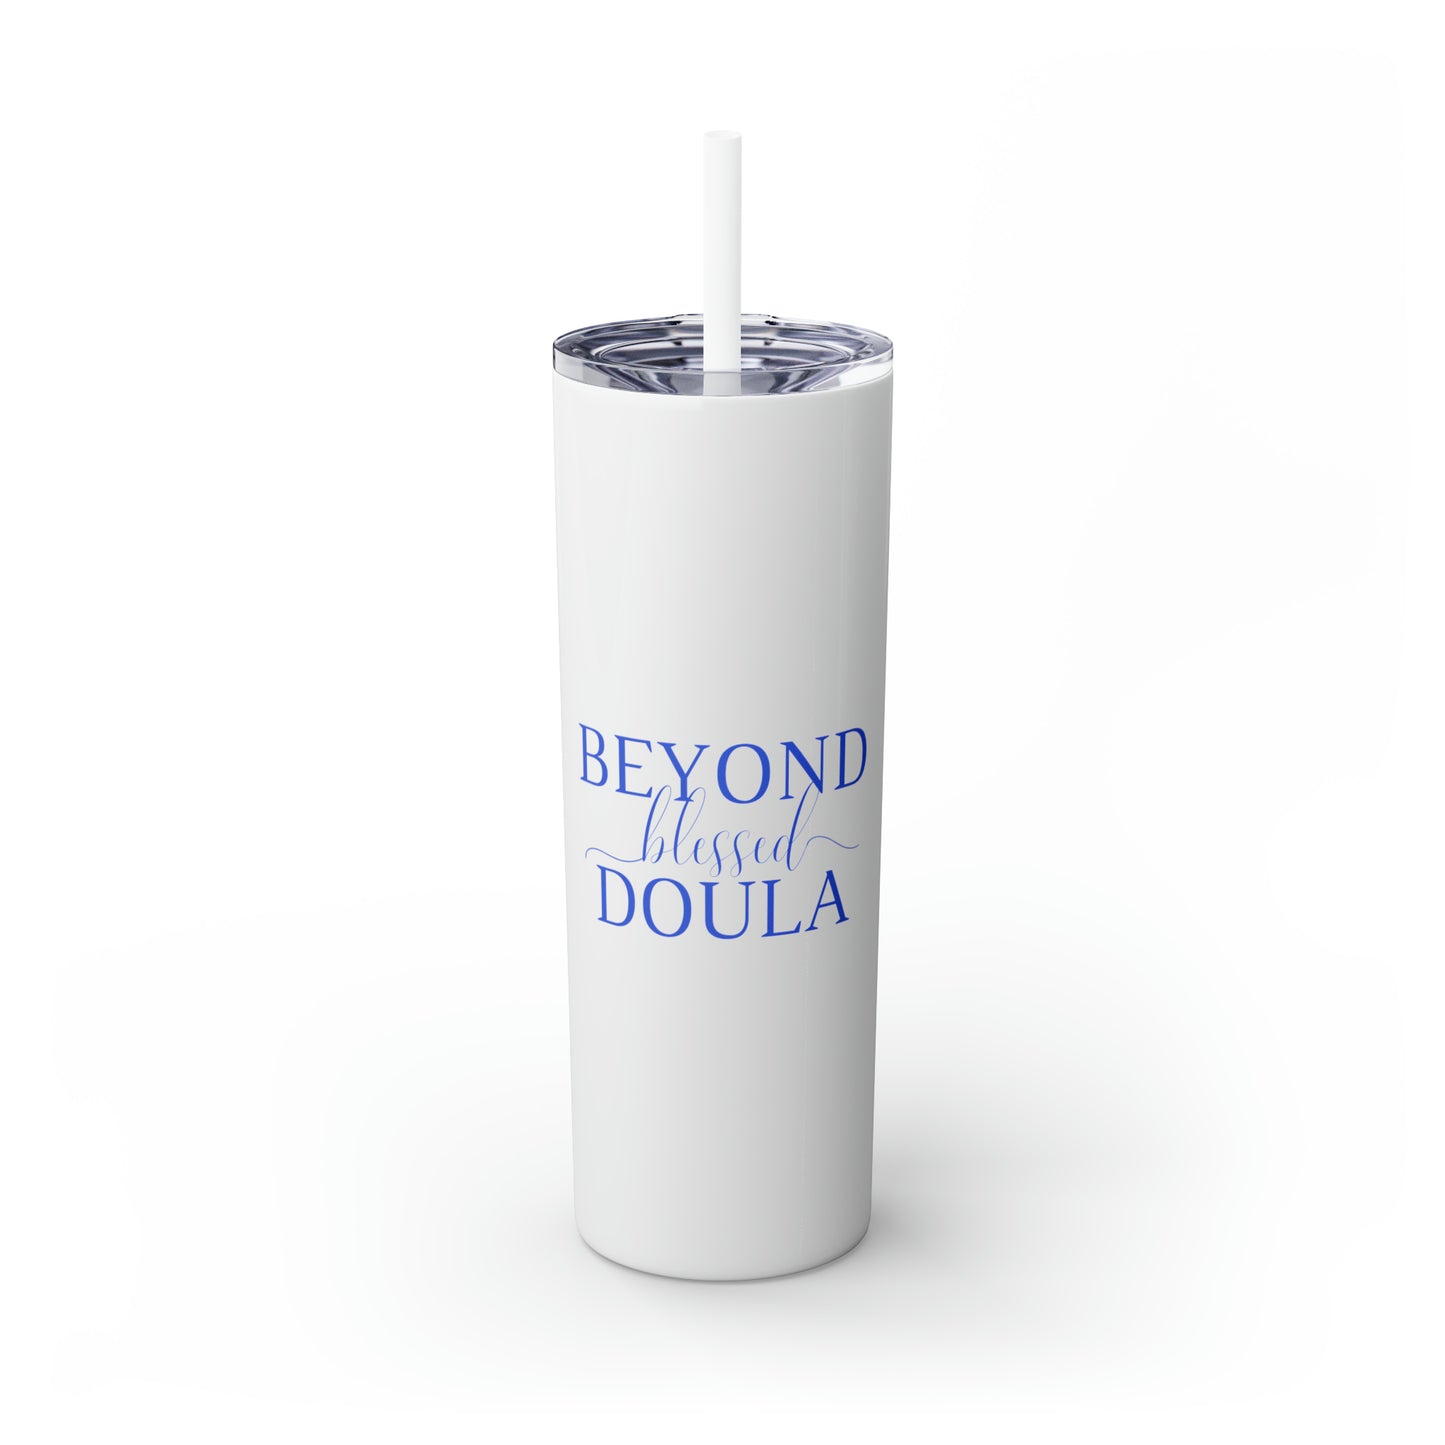 Beyond Blessed Doula - Plain Skinny Tumbler with Straw, 20oz - Royal Blue